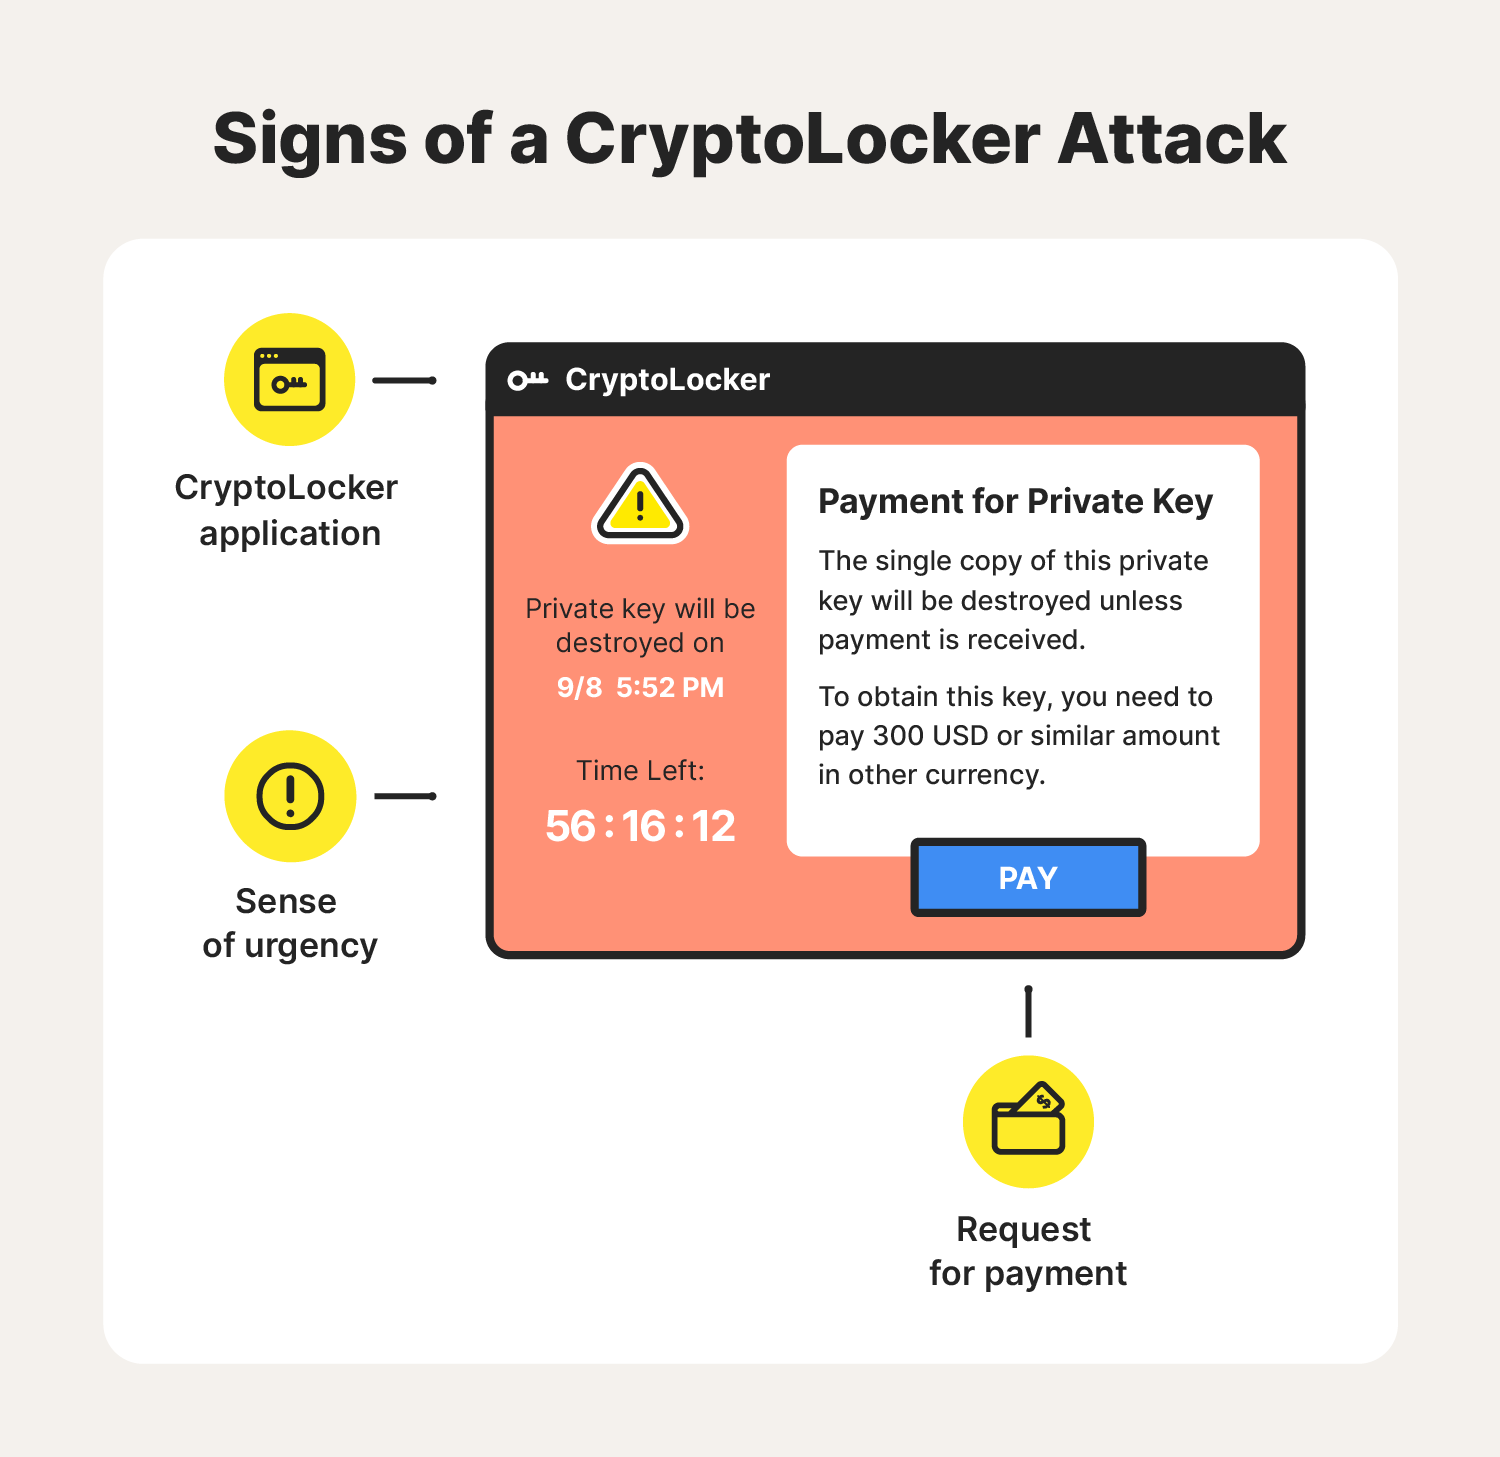 A graphic showcases the warning signs of a CryptoLocker attack.